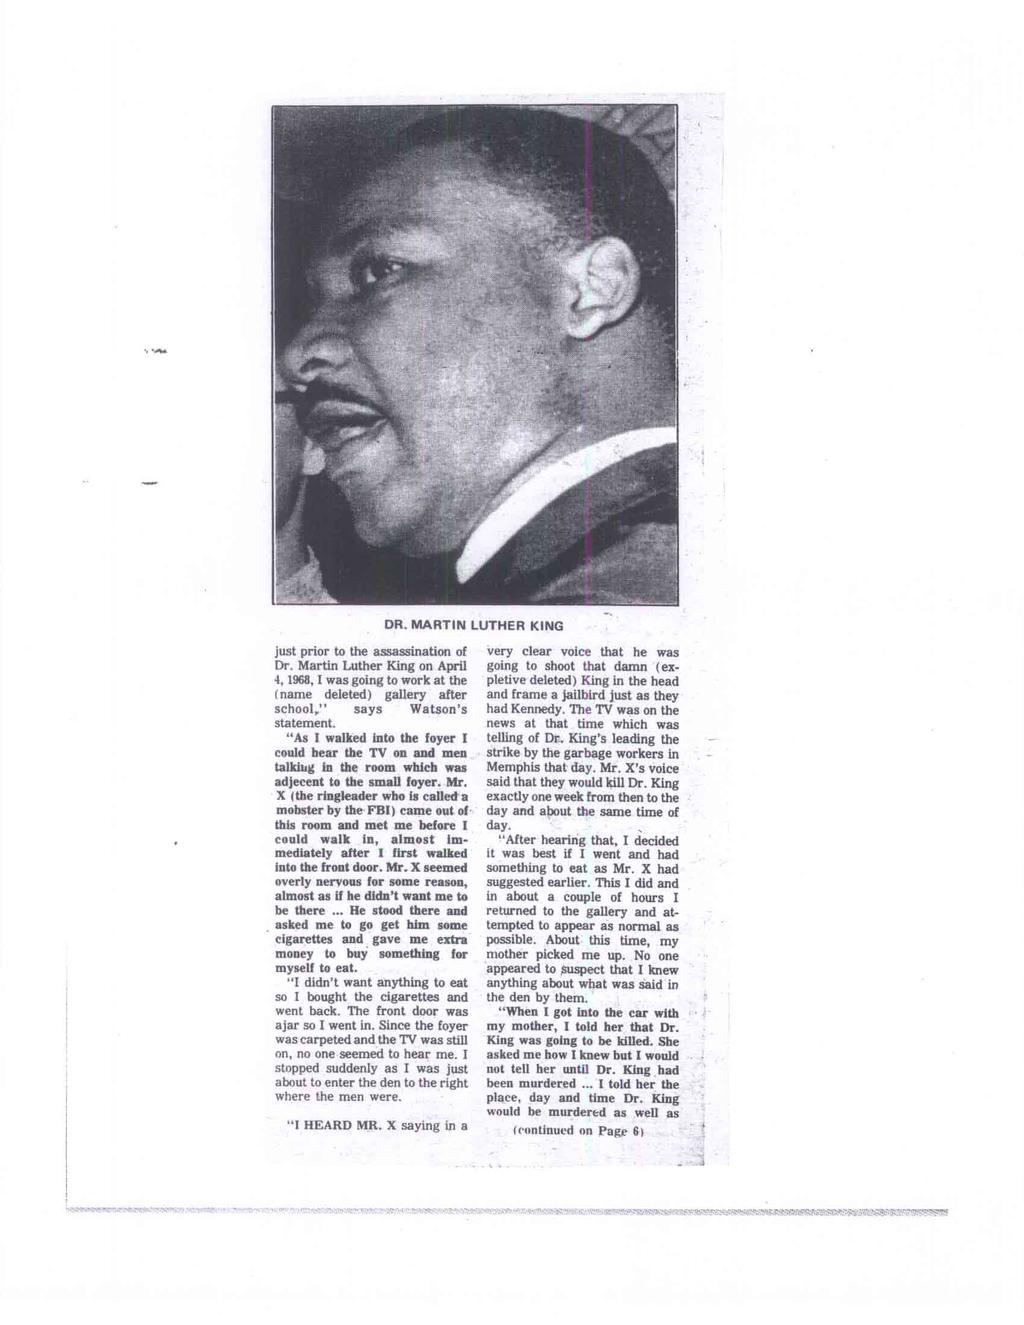 DR. MARTIN LUTHER KING just prior to the assassination of Dr. Martin Luther King on April 4, 1968, I was going to work at the name deleted) gallery after school," says Watson's statement.